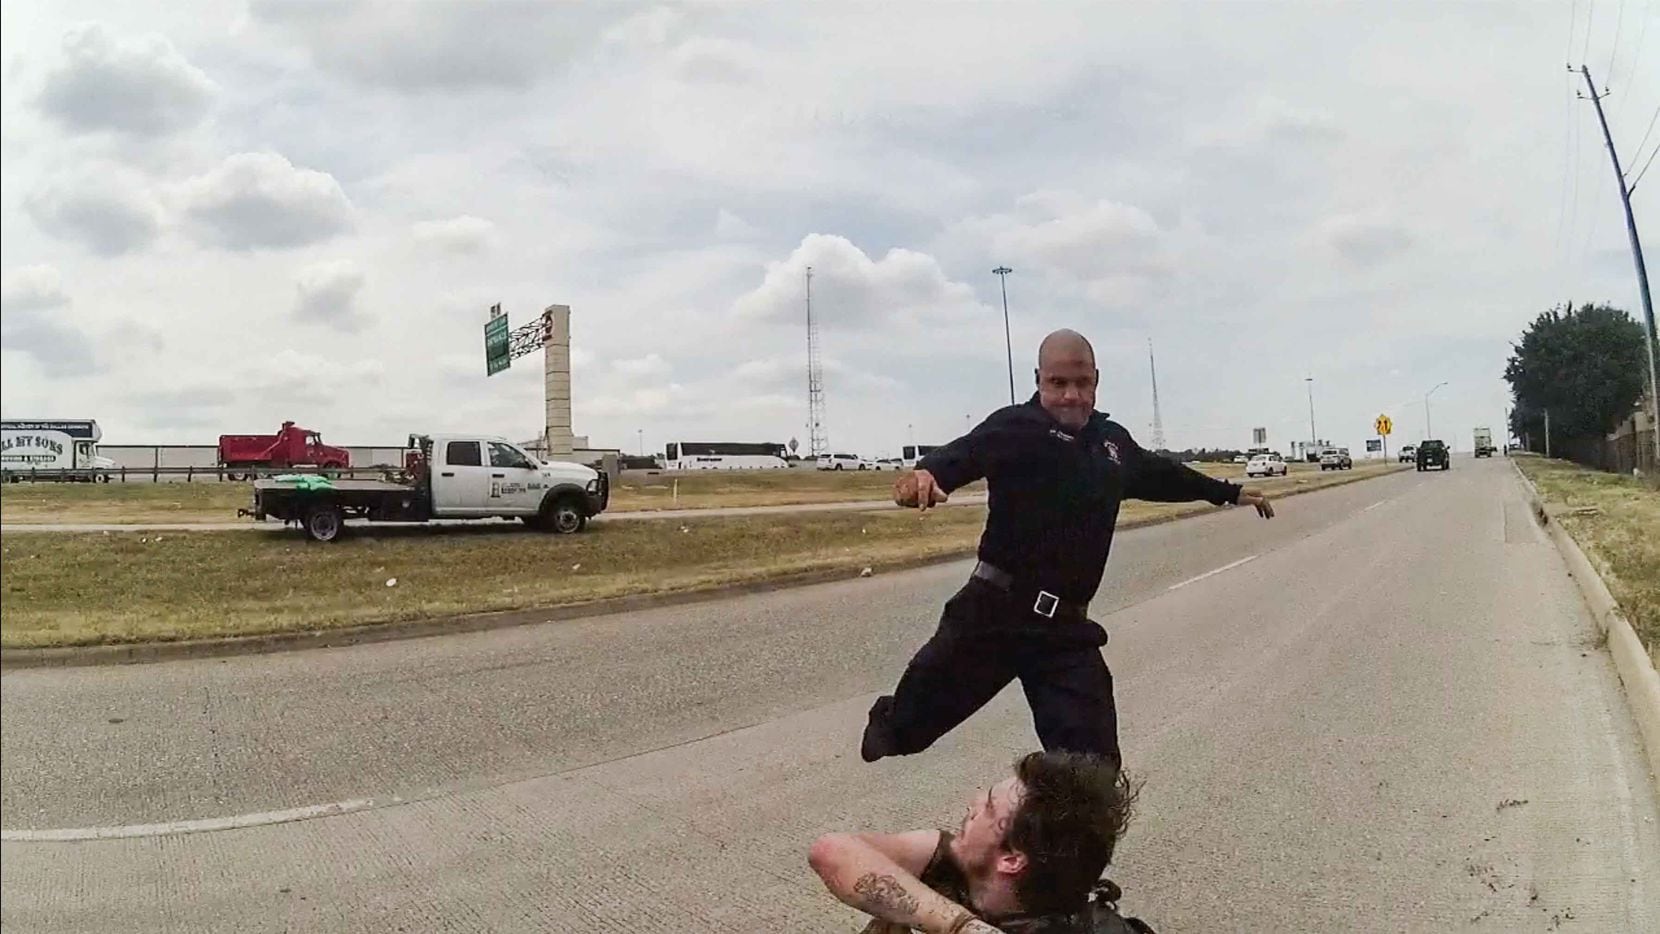 A frame from a police body cam shows Dallas firefighter Brad Cox during an altercation with Kyle Robert Vess on Aug. 2, 2019.